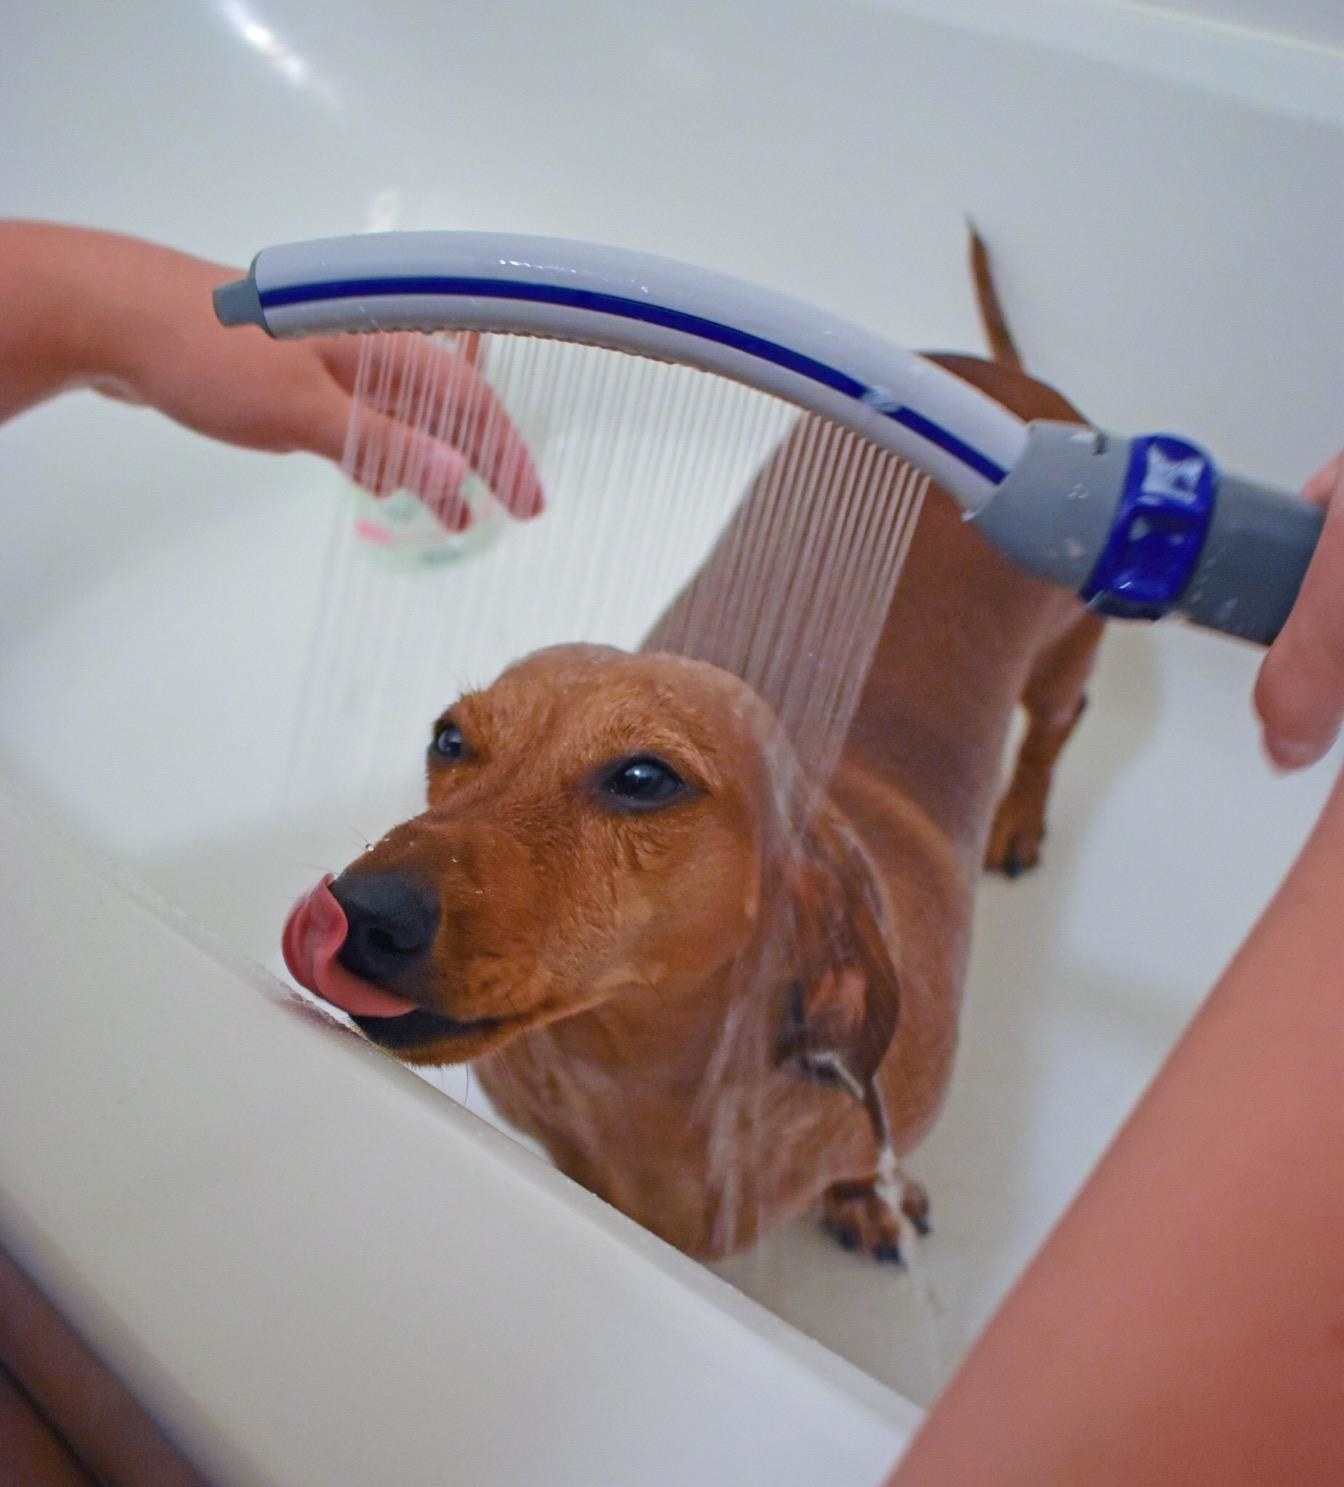 A dog being washed with a stream of water from the wand